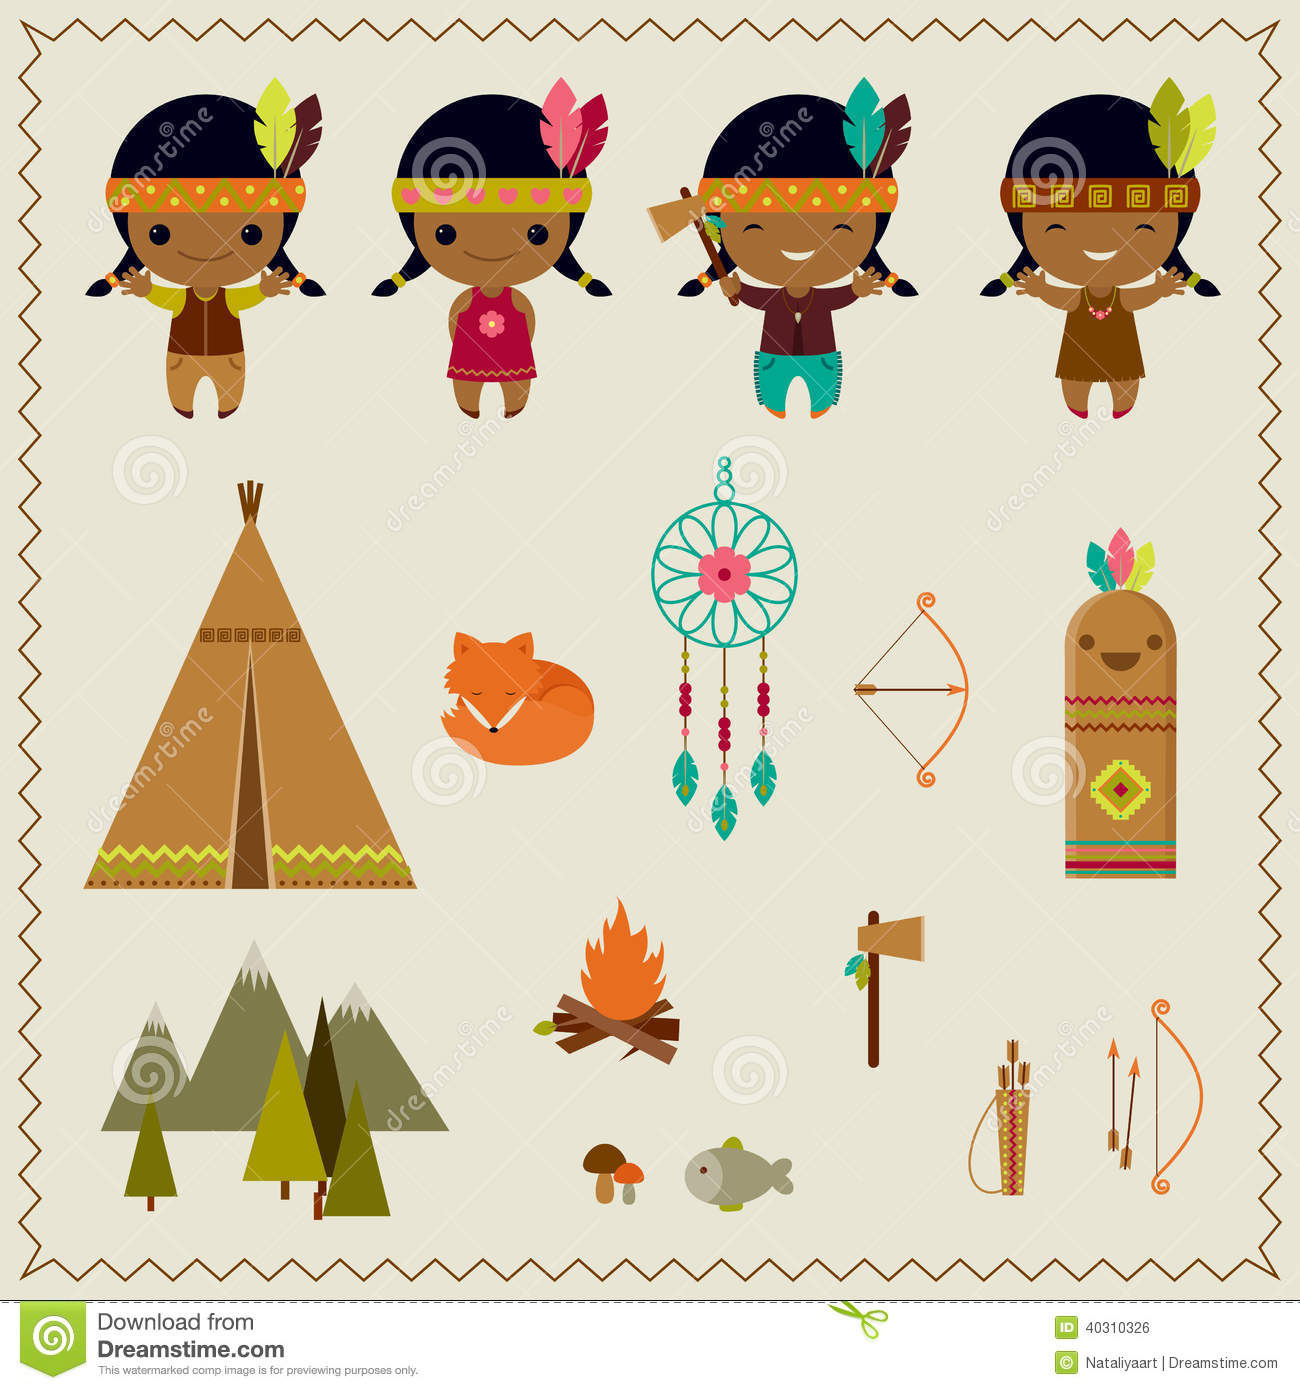 American Indian Clipart Icons Design Stock Vector   Image  40310326